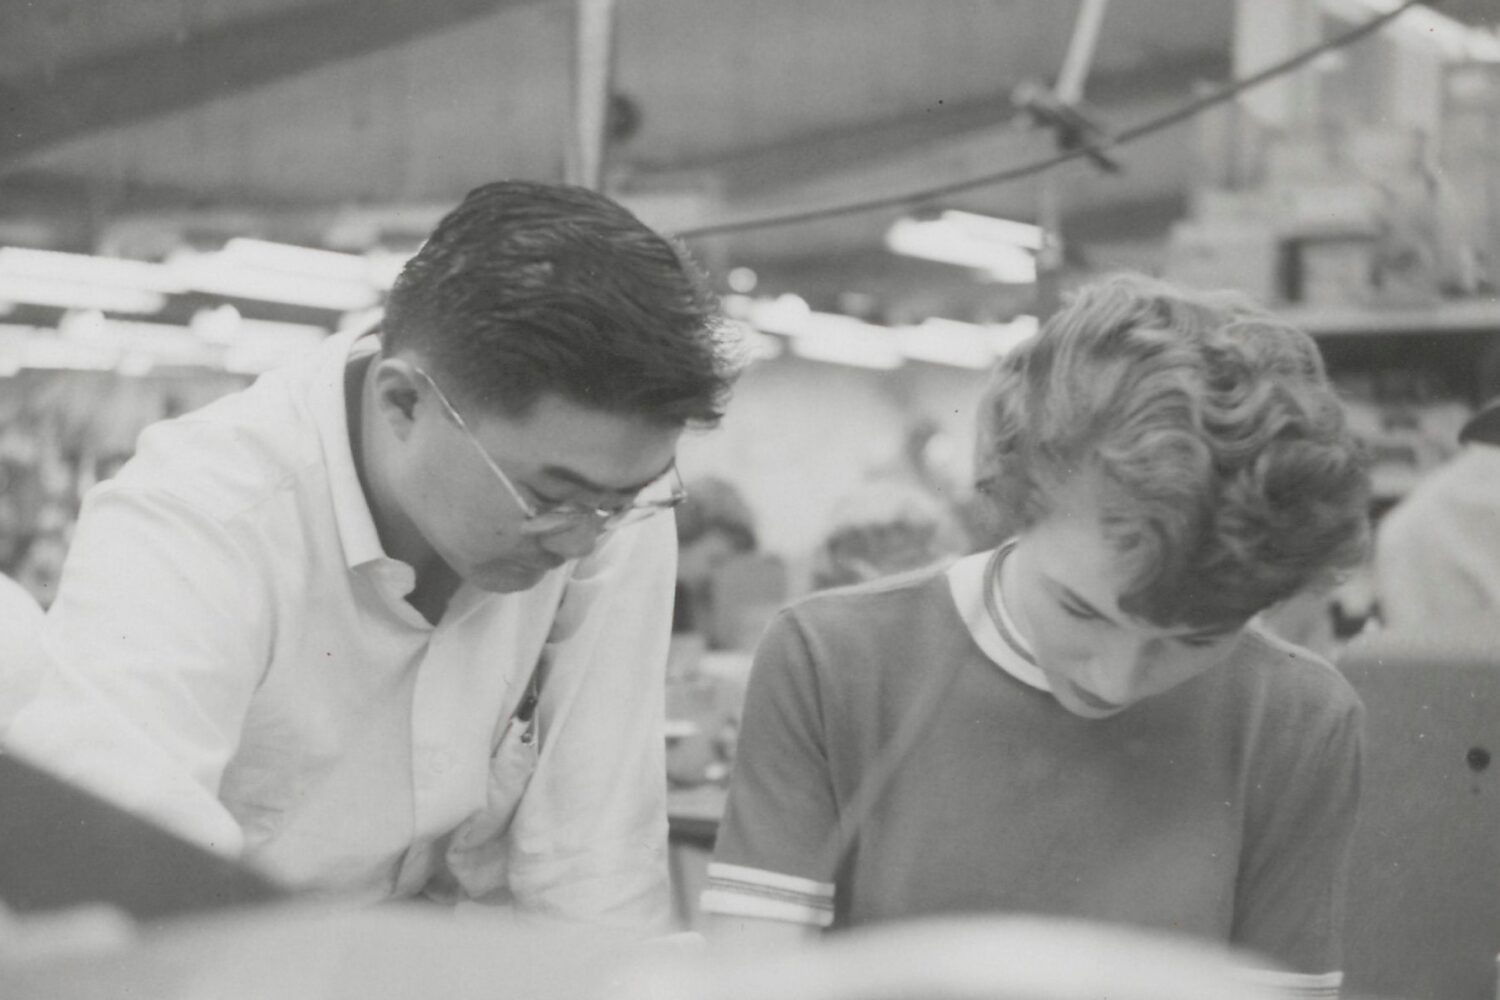 A man and woman working together in 1956.